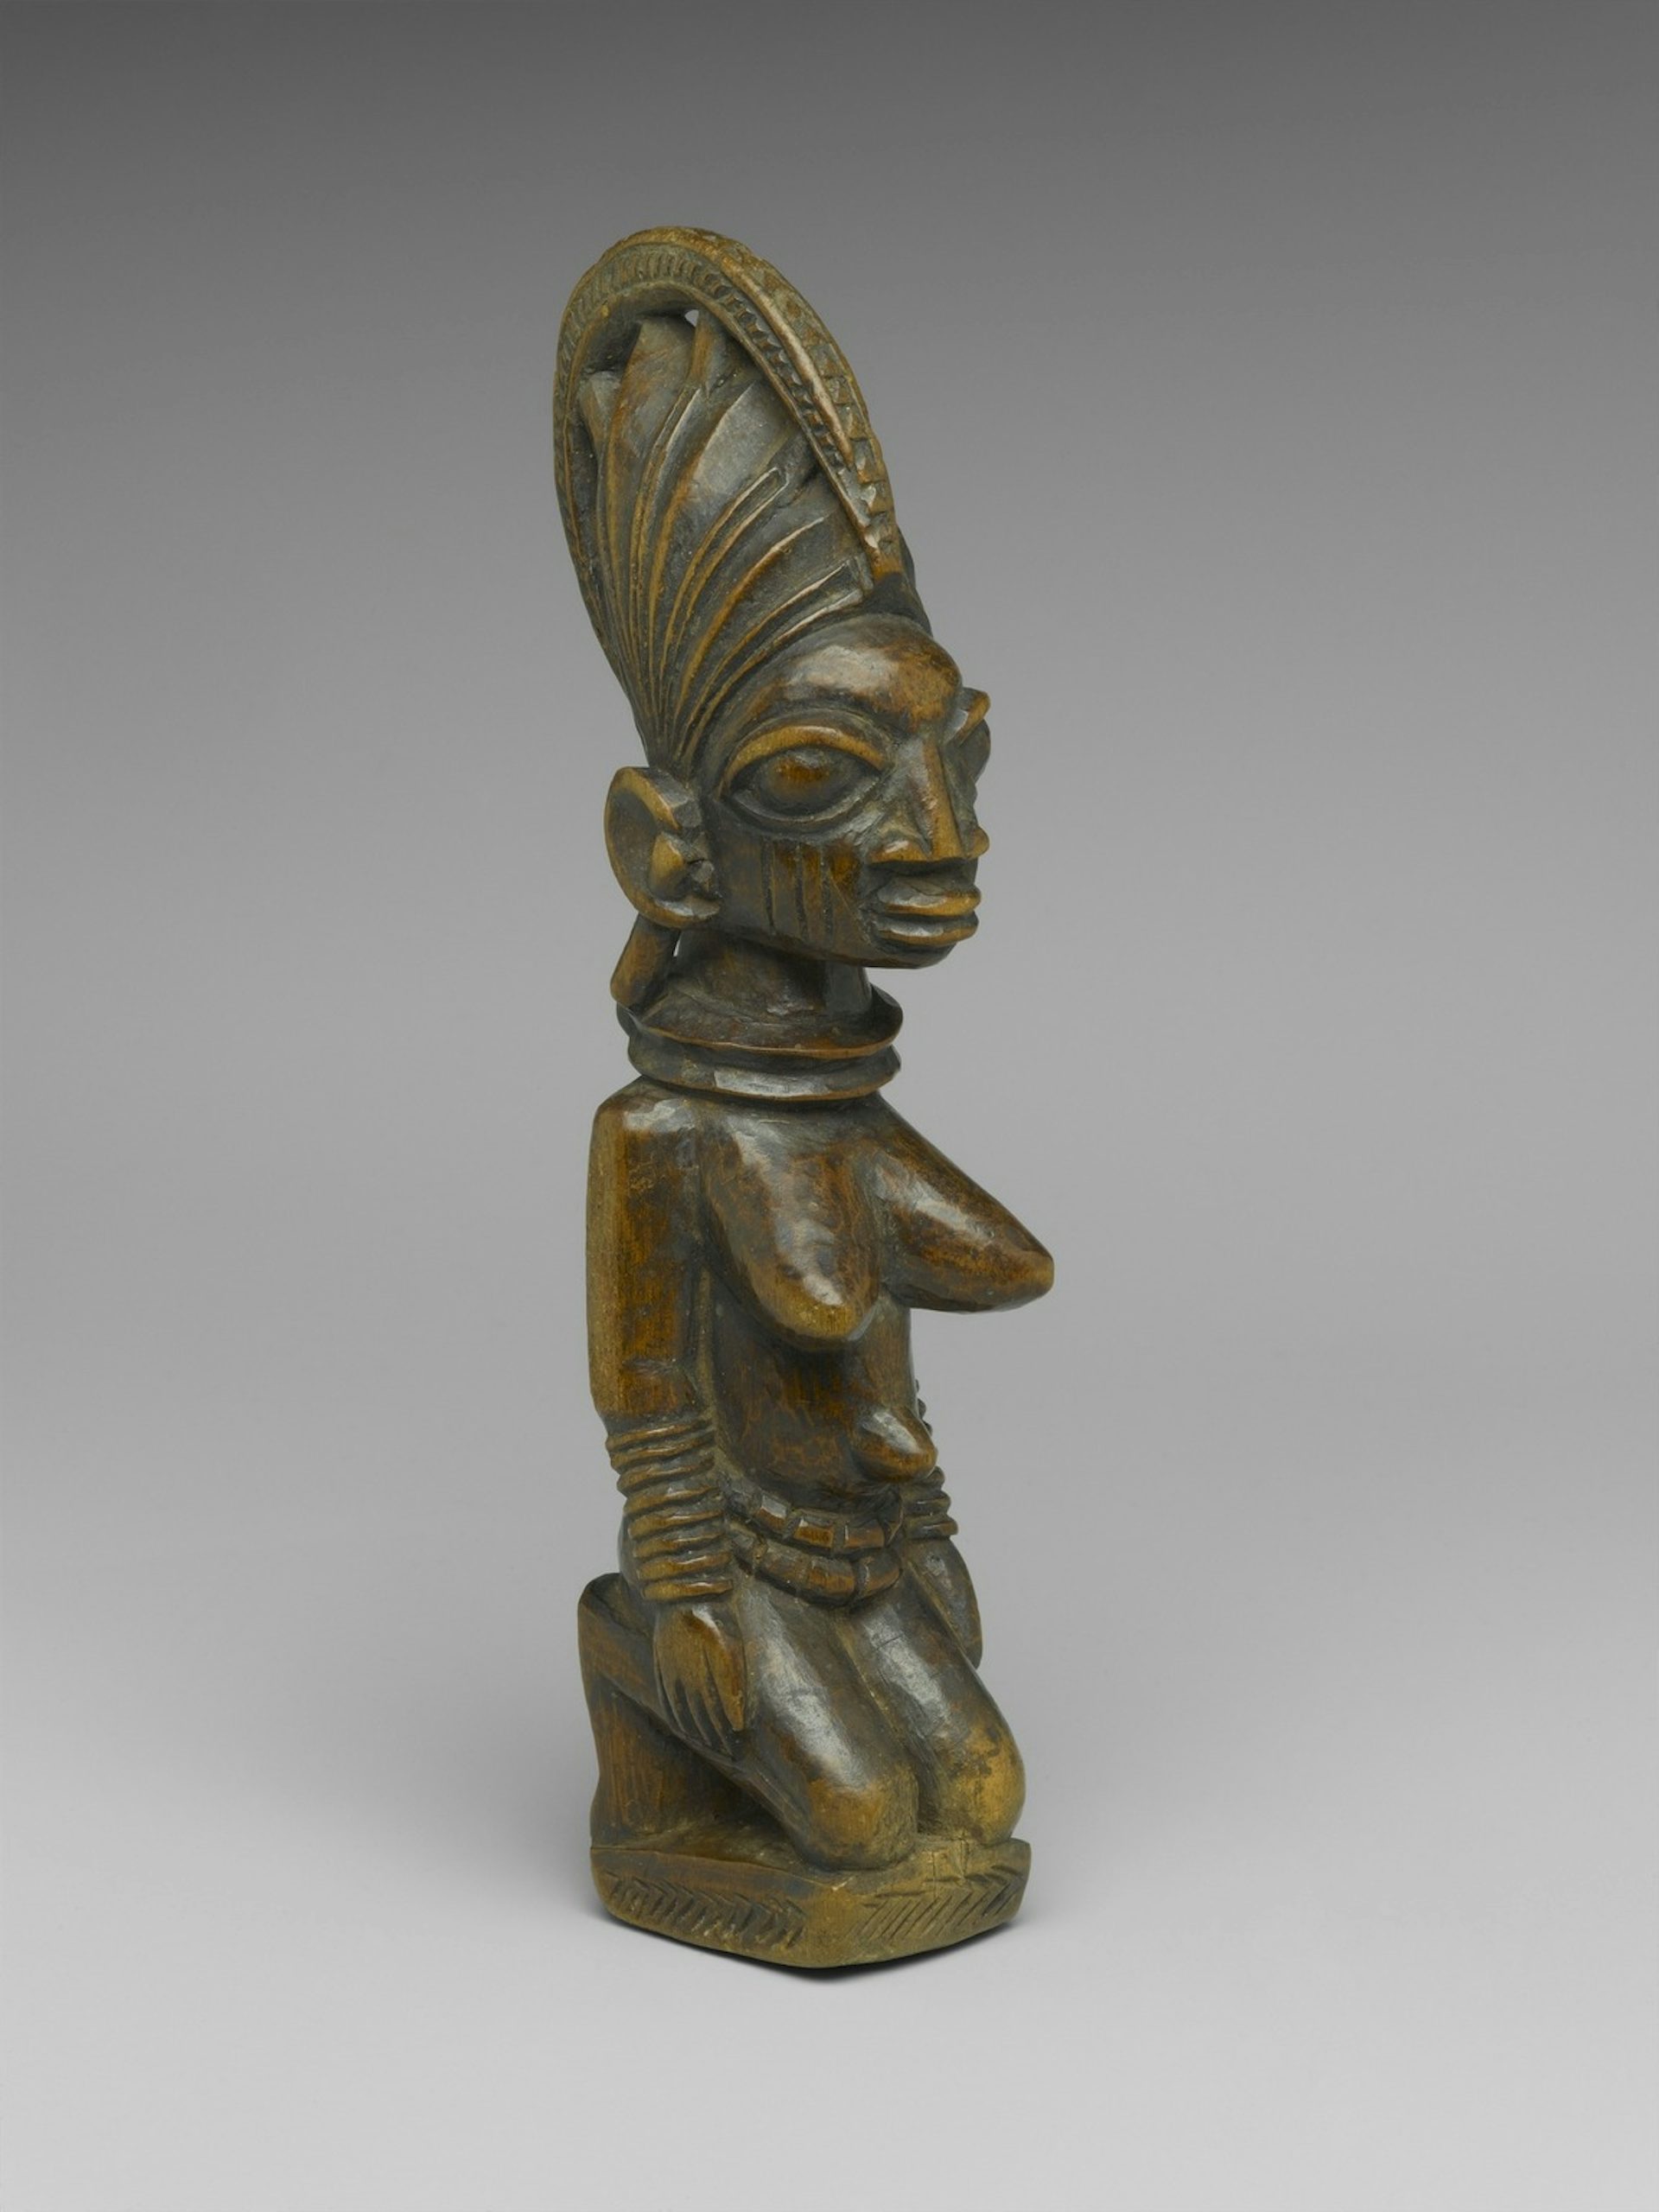 Kneeling female figure by Areogun of Osi (late 19th or early 20th century).